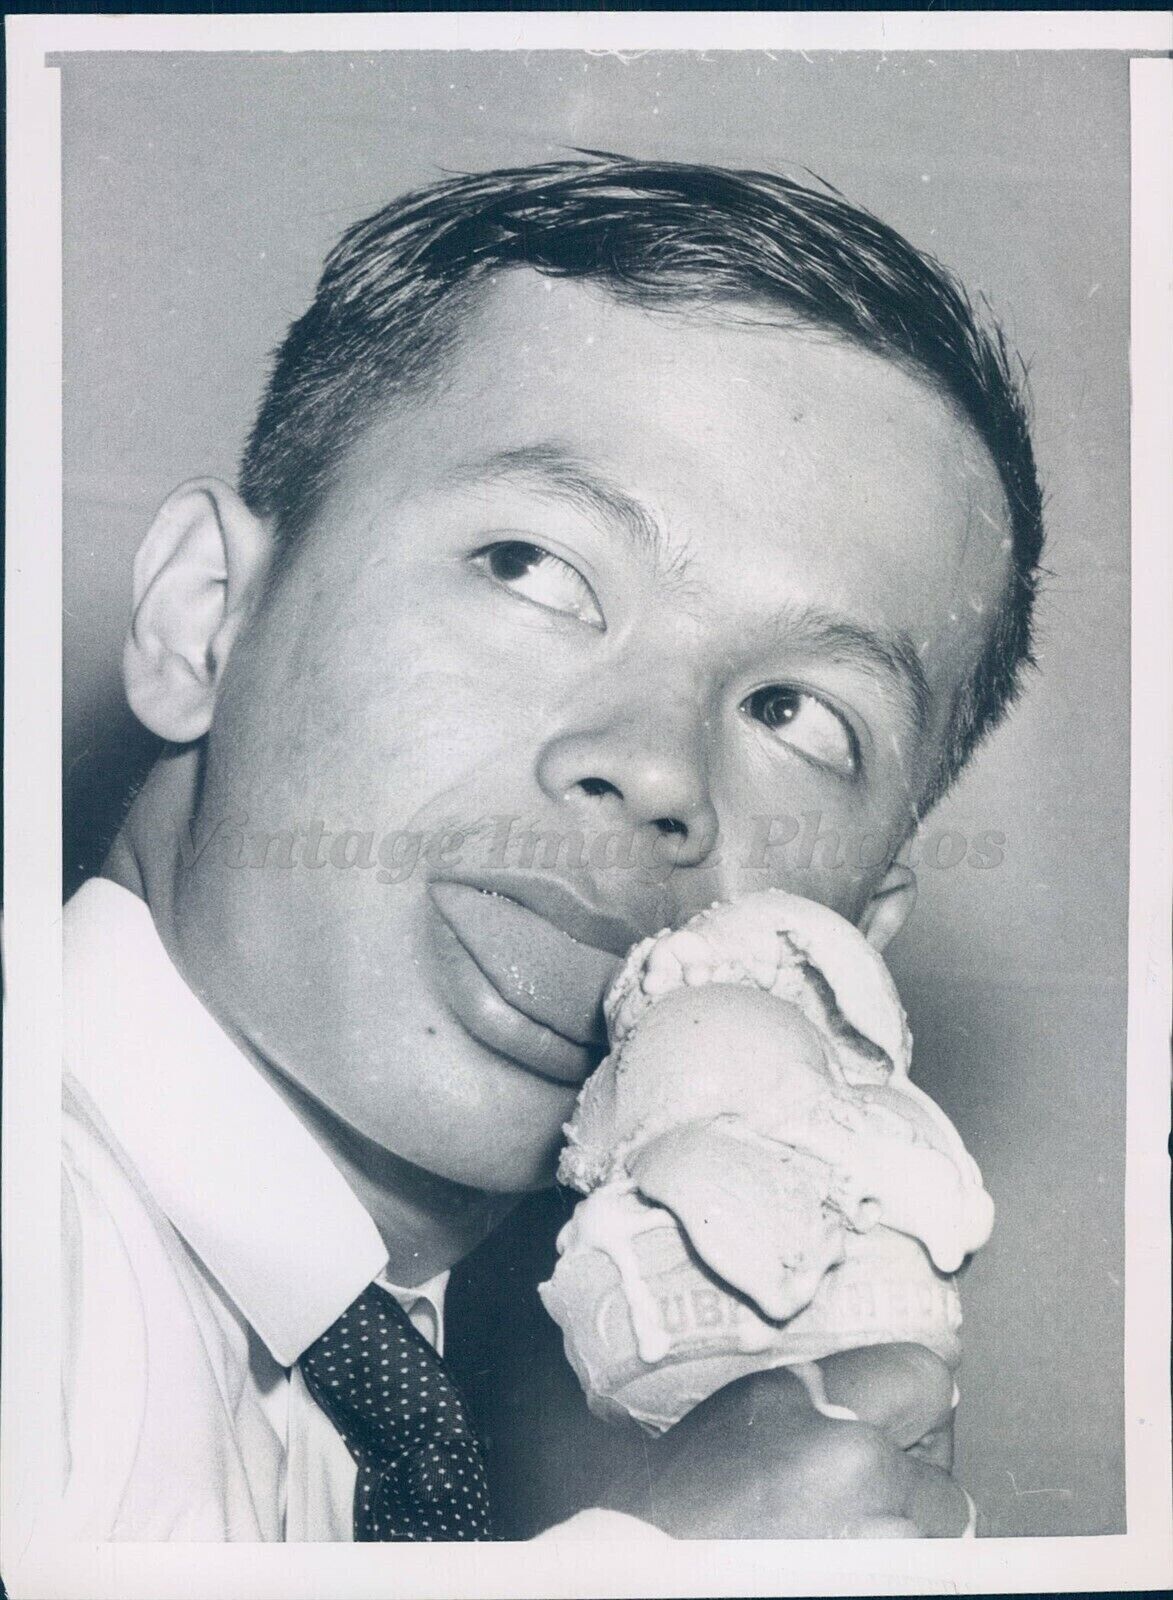 1954 Hla Thein Ice Cream Boy Troy NY Triple Dip Strawberry Young Child… Photo